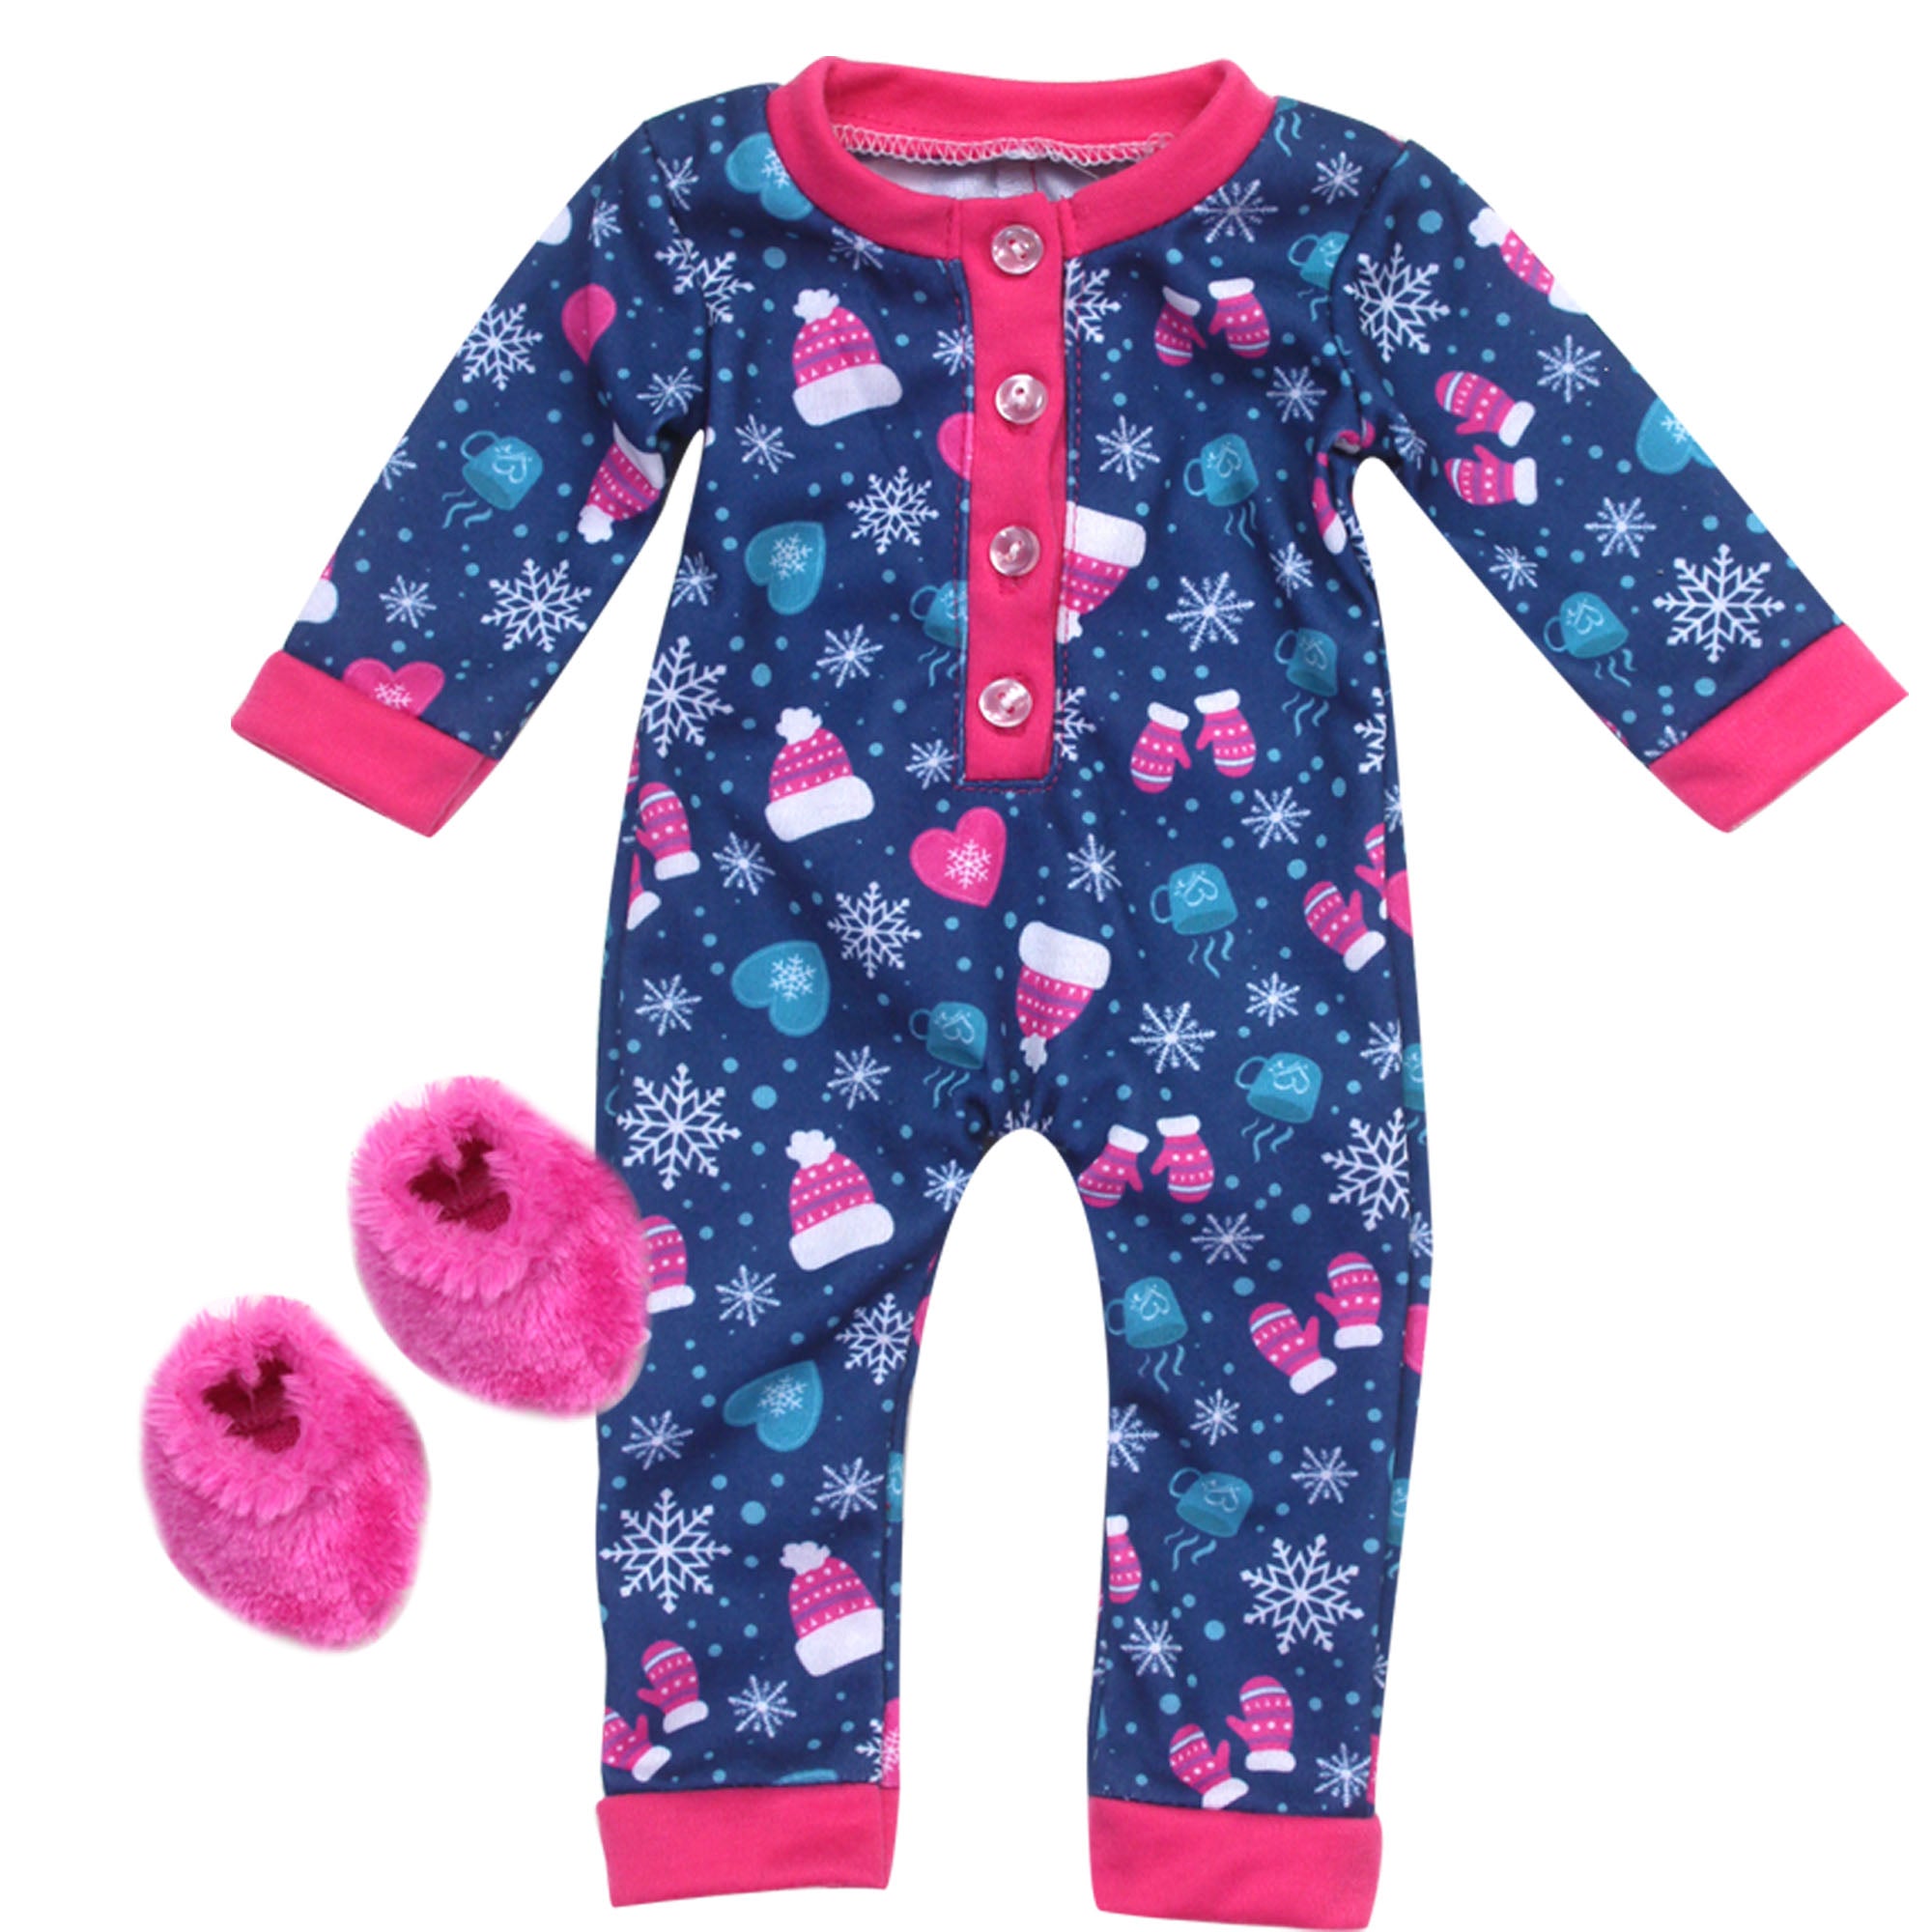 Sophia’s Hot Cocoa Print Long-Sleeved Winter Pajama Onesie with Matching Fuzzy Slippers Sleep Set for 15” Baby Dolls, Navy/Hot Pink